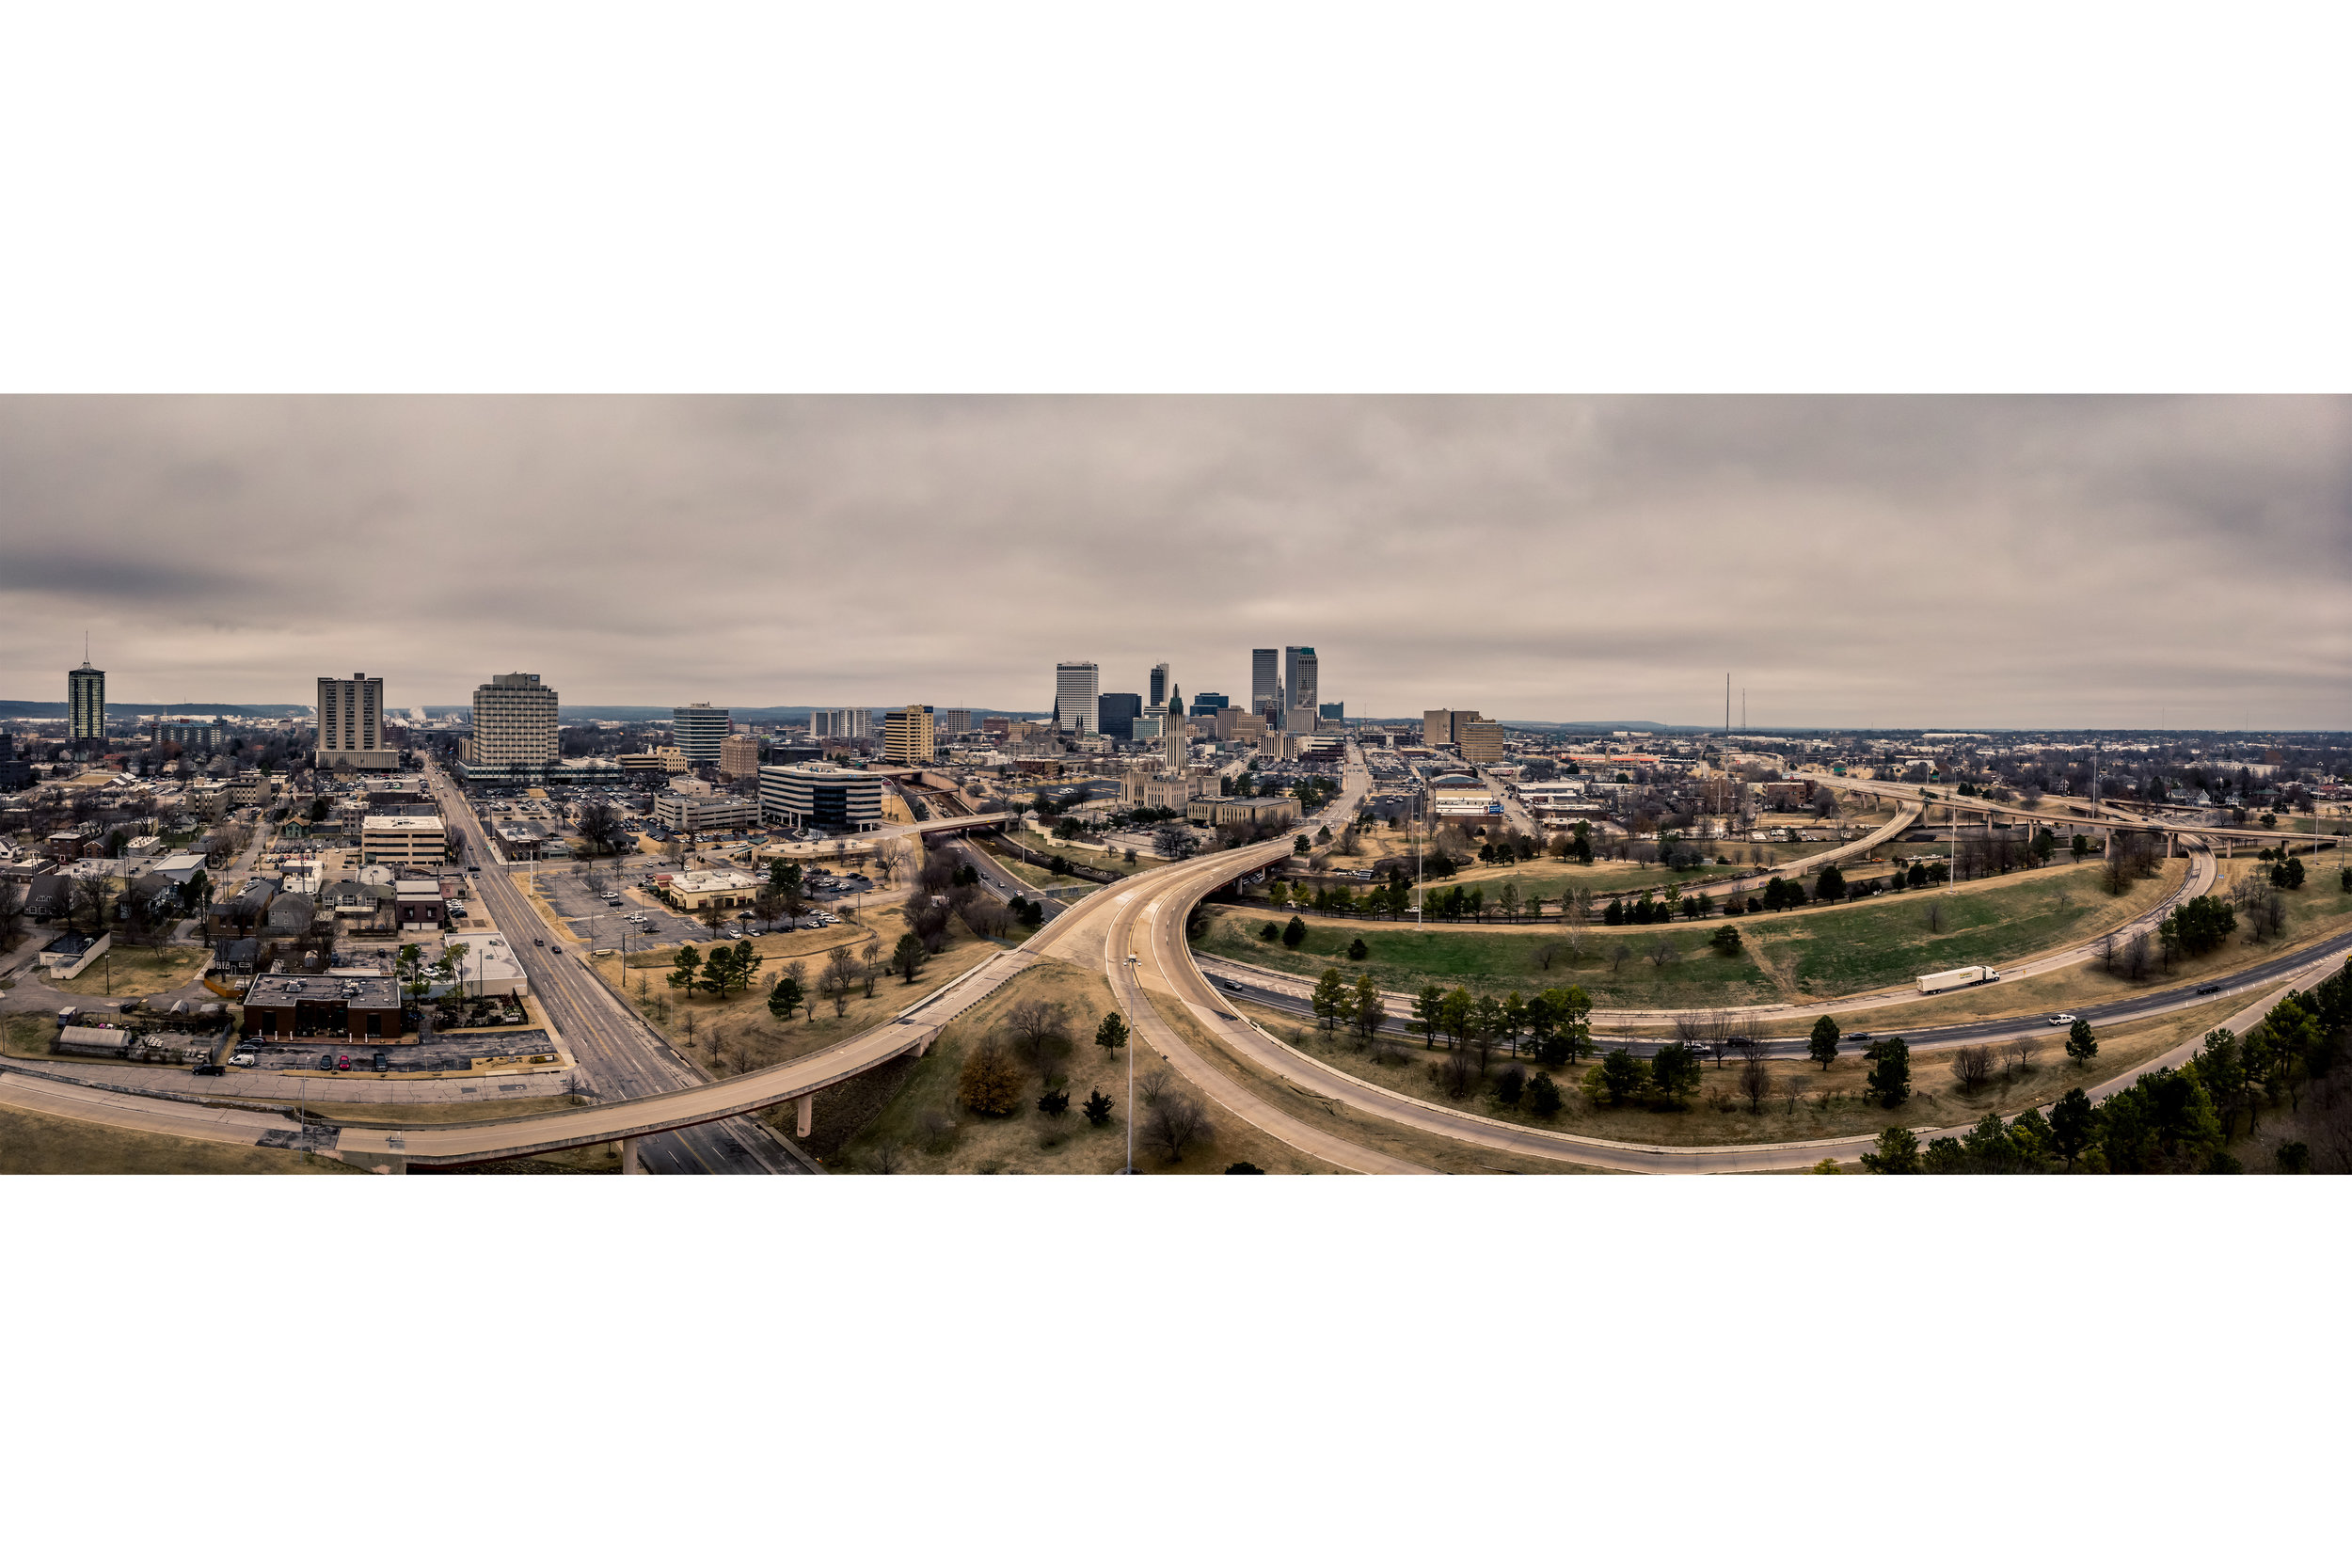 Downtown Tulsa Drone Photography Dec 17 2019 - Bound For Glory Productions.jpg